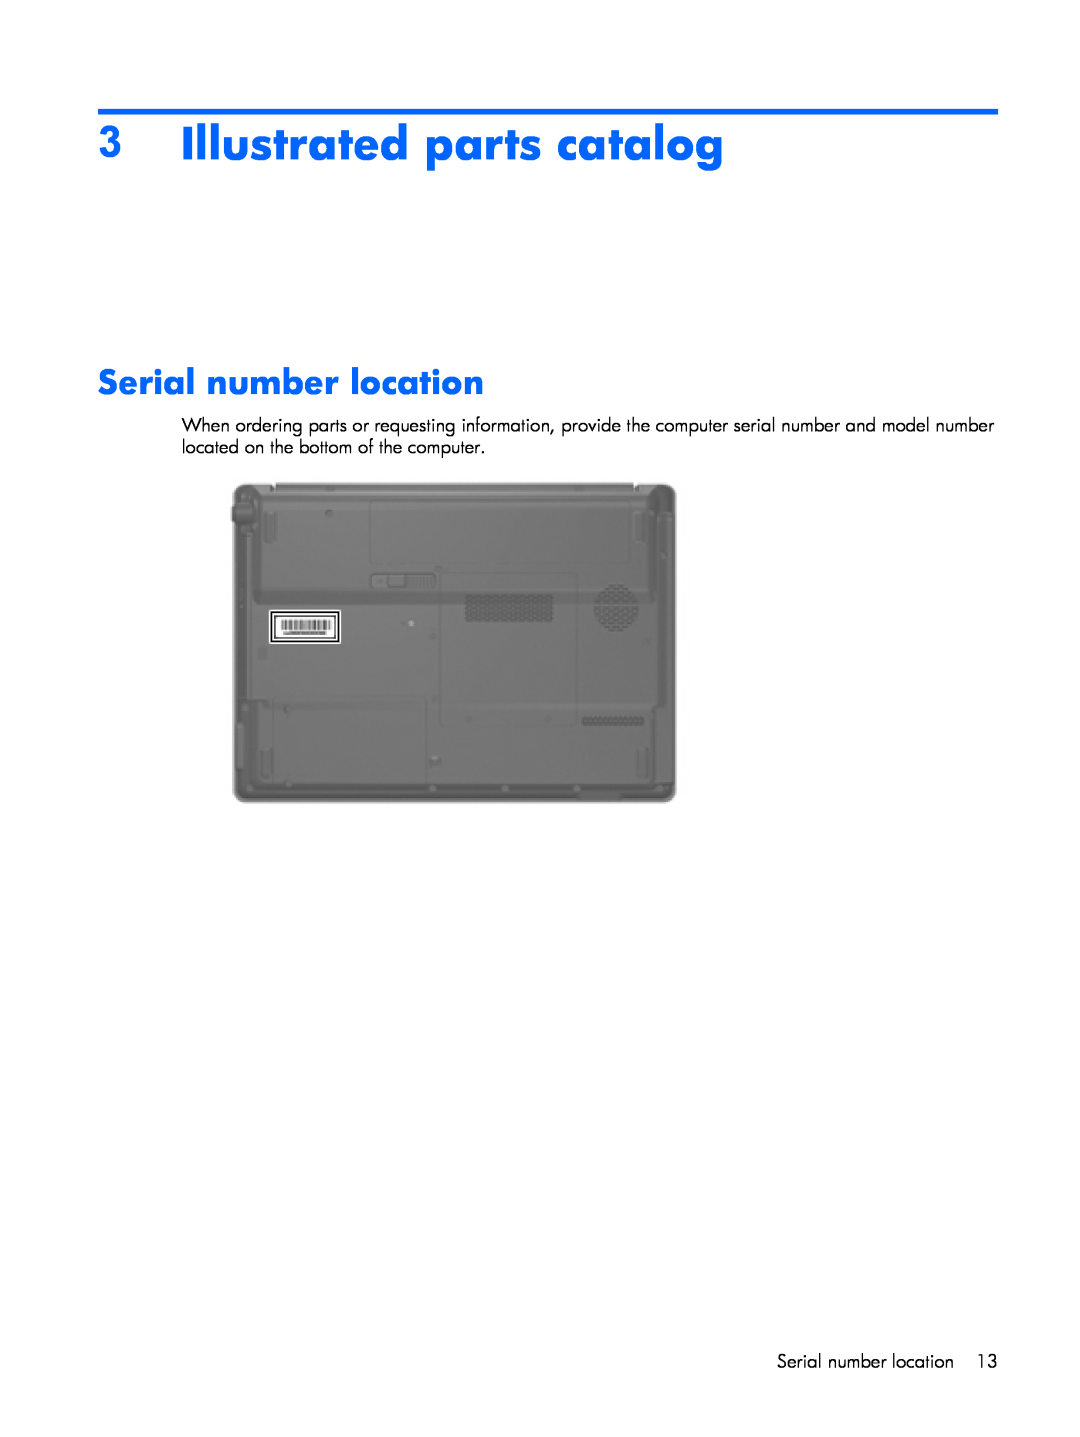 HP C753TU, C721TU, C725BR, C718TU, C720BR, C717TU, C717NR, C713NR, C715NR, C750T Illustrated parts catalog, Serial number location 